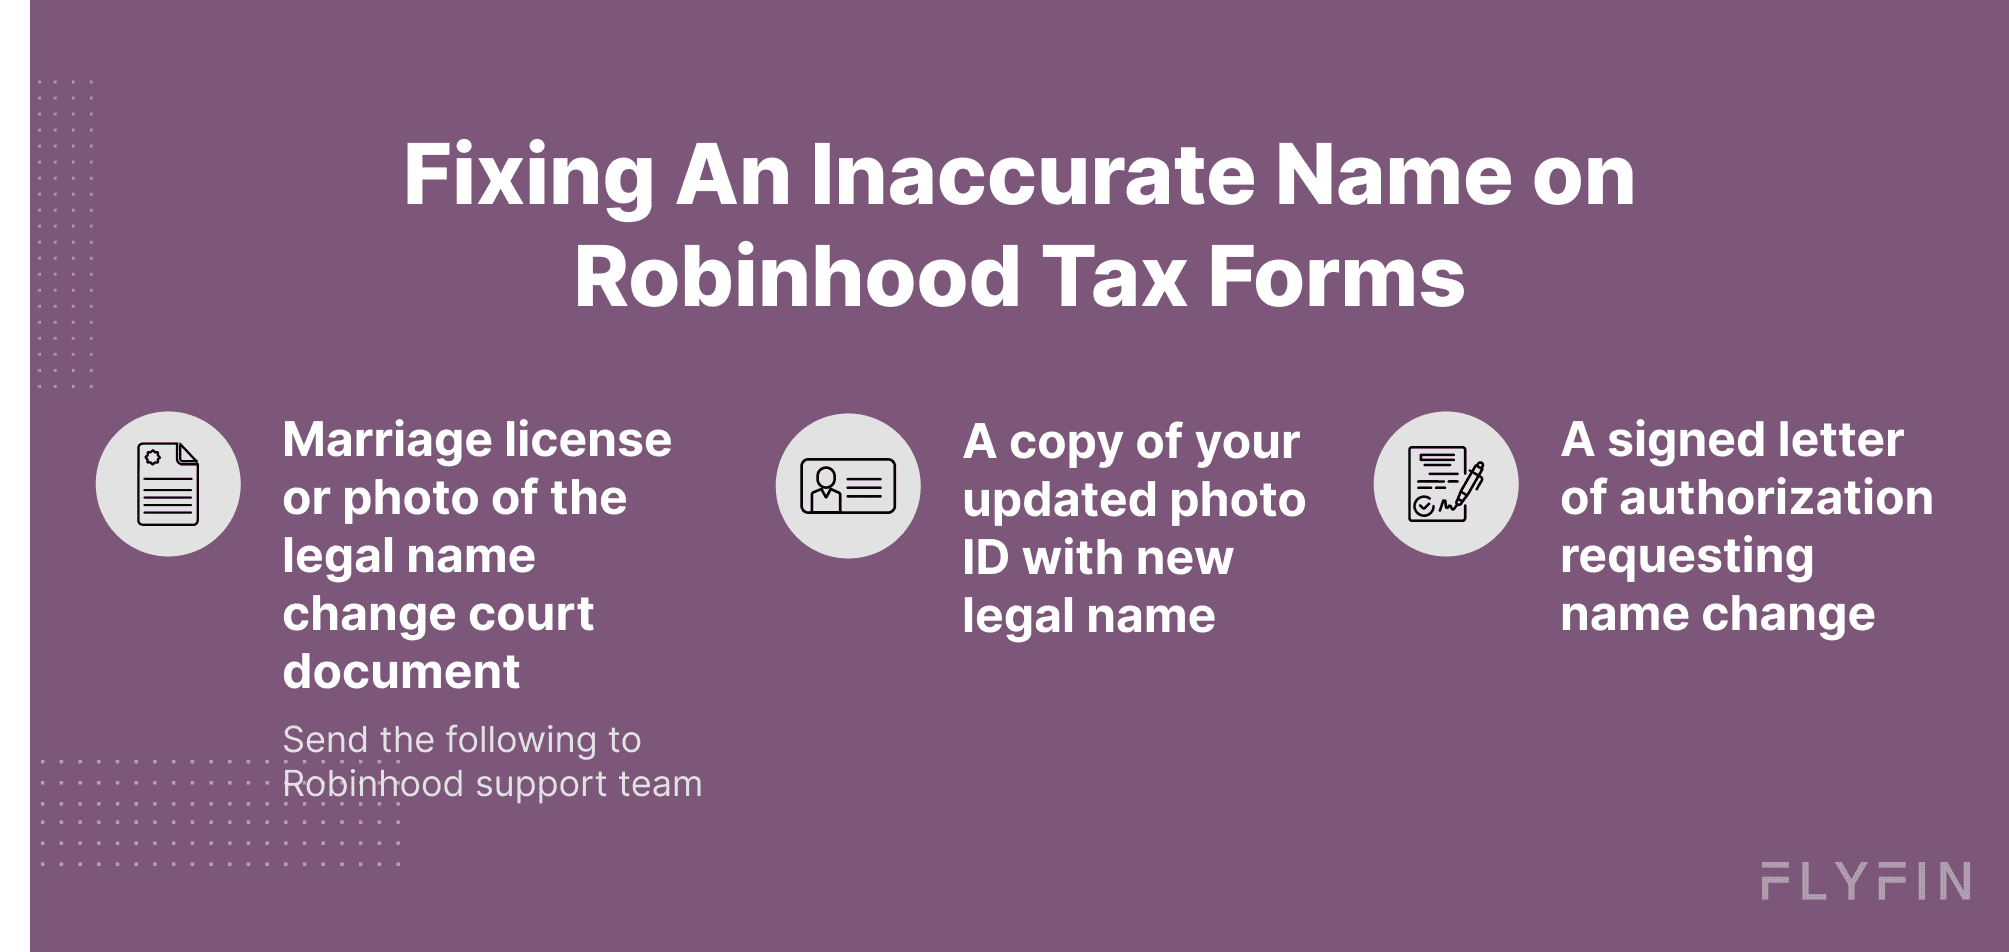 Infographic entitled Filing an Inaccurate Name On Robinhood Tax Forms listing the documents required to fix an incorrect Robinhood tax form.